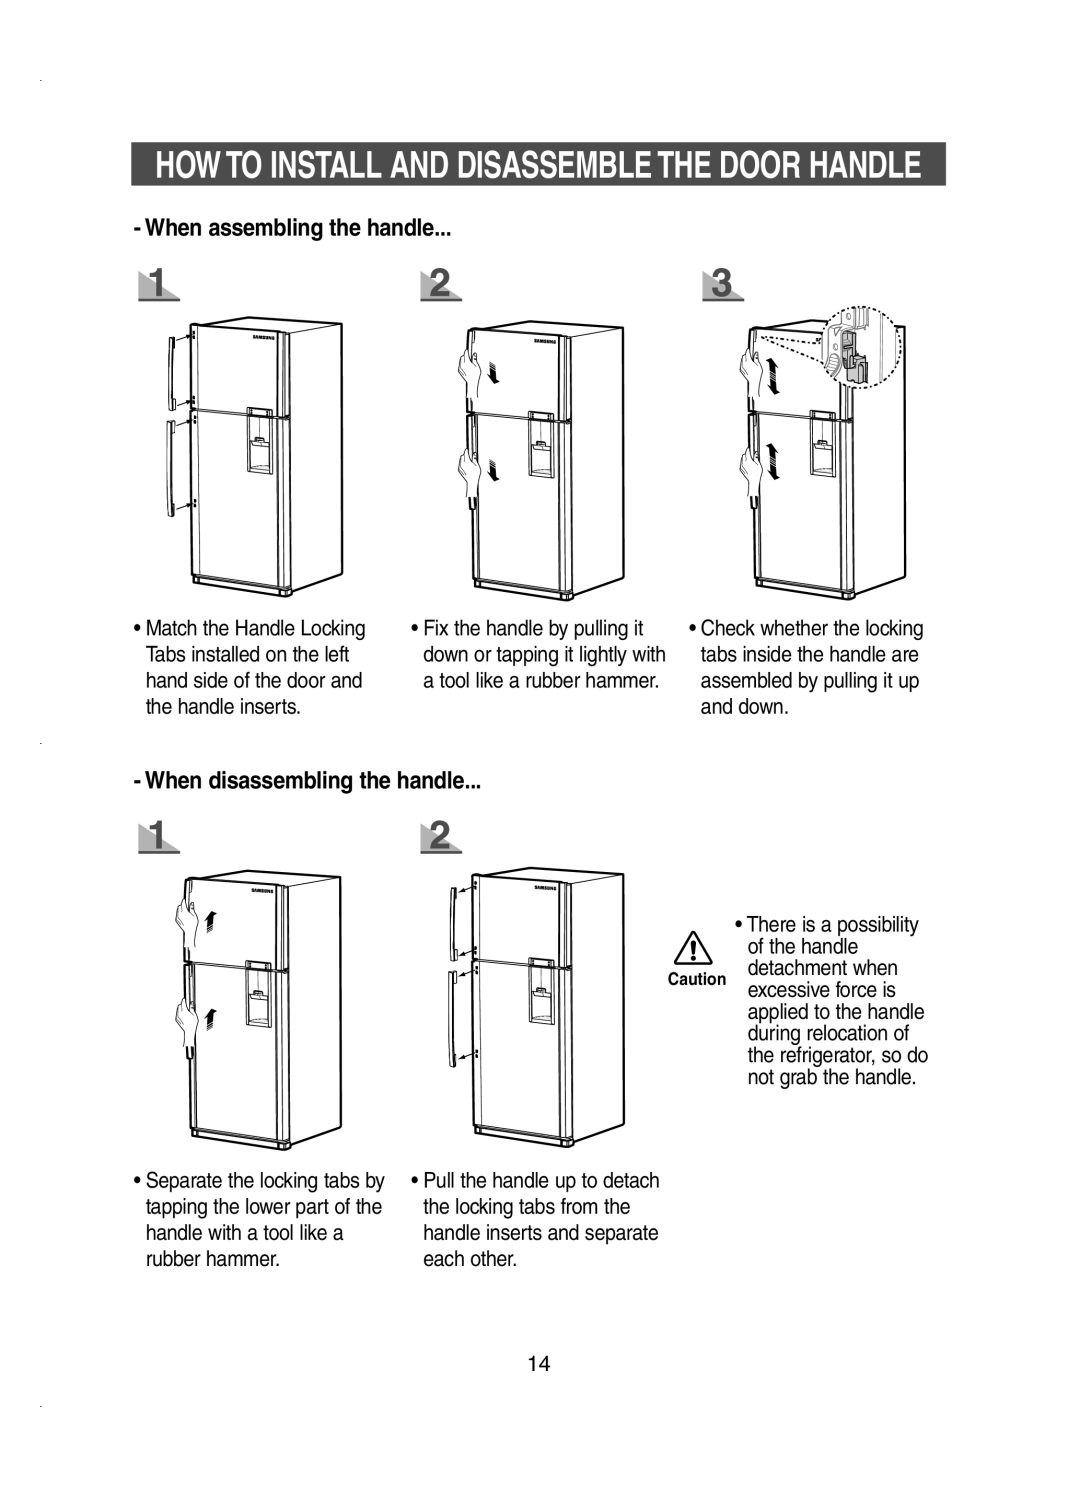 Samsung RT58ZAMT1/XET, RT58ZATG1/XET, RT62VANB1/XET, RT58ZANB1/XET manual HOW to Install and Disassemble the Door Handle 